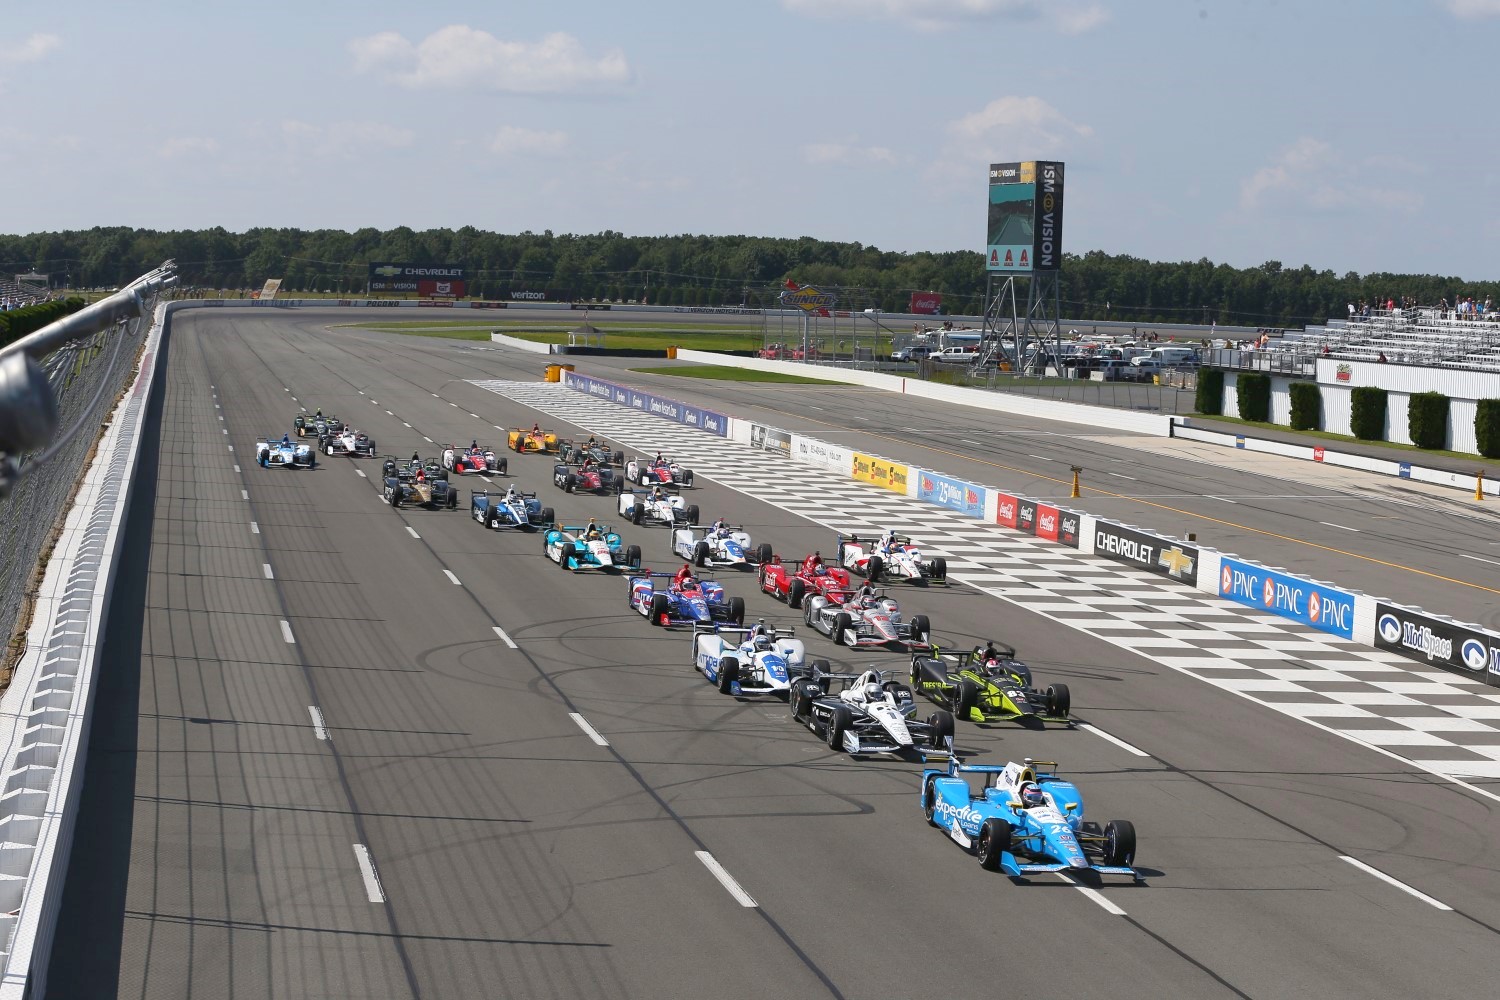 Pocono was the best IndyCar race of the year and certainly better than both NASCAR races at the track